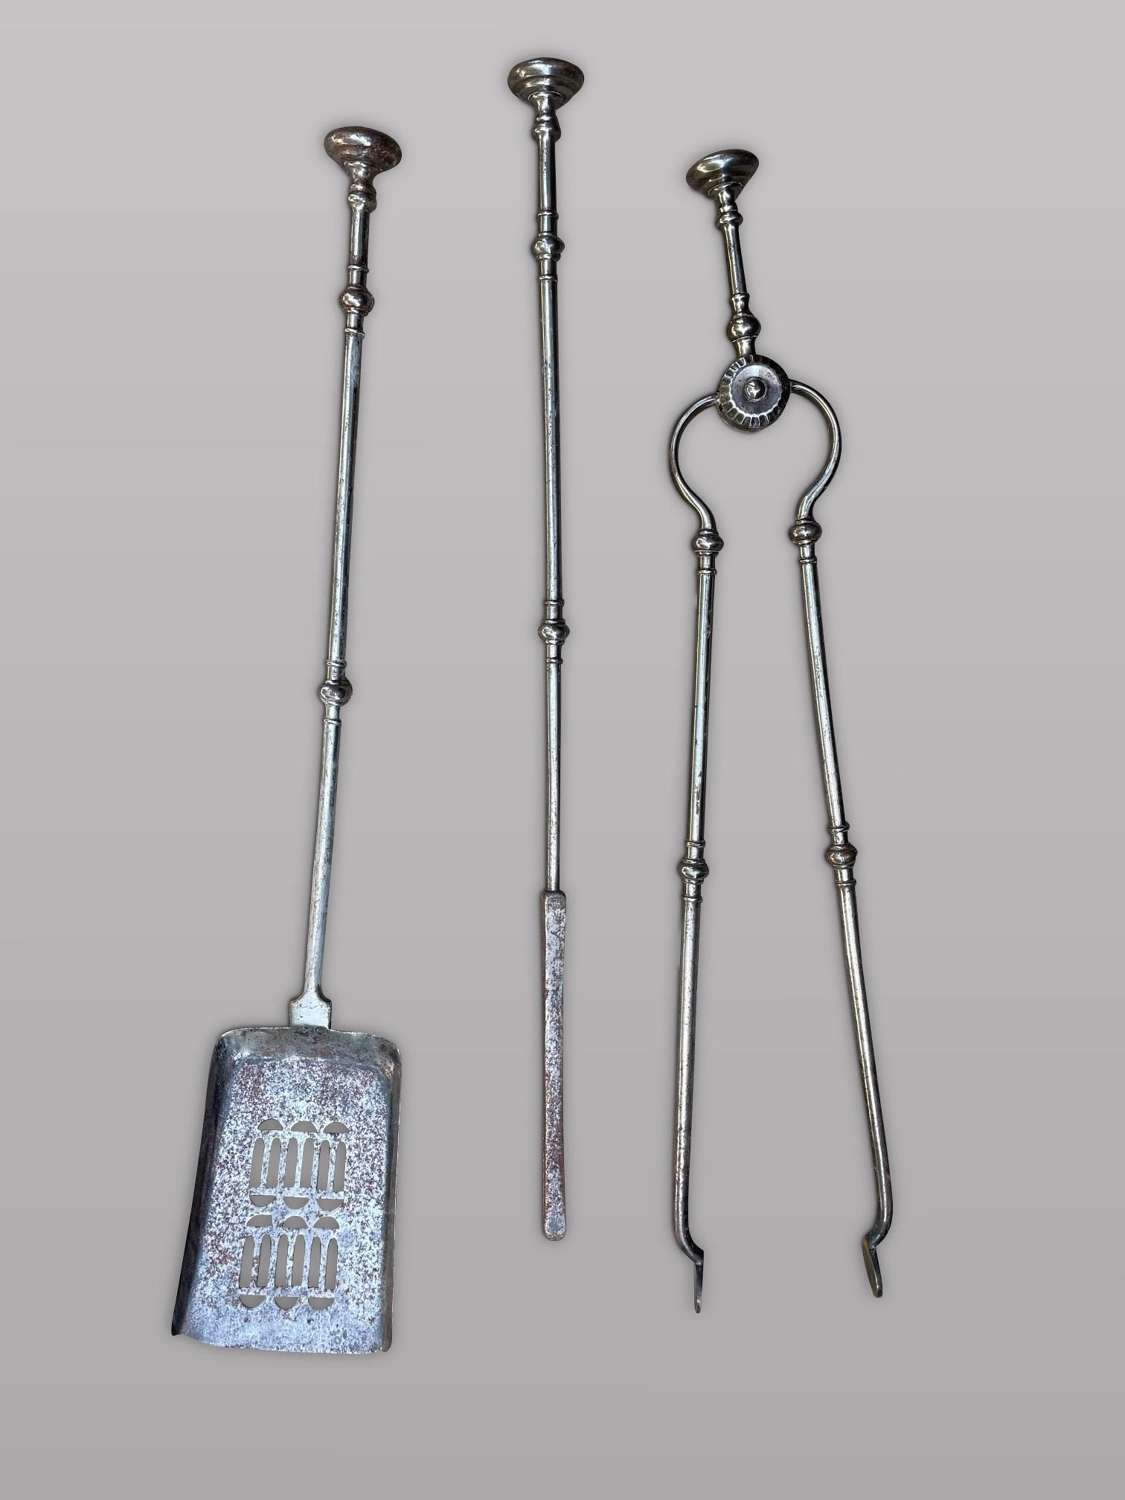 A Pair of 19th Century Steel Fire Irons